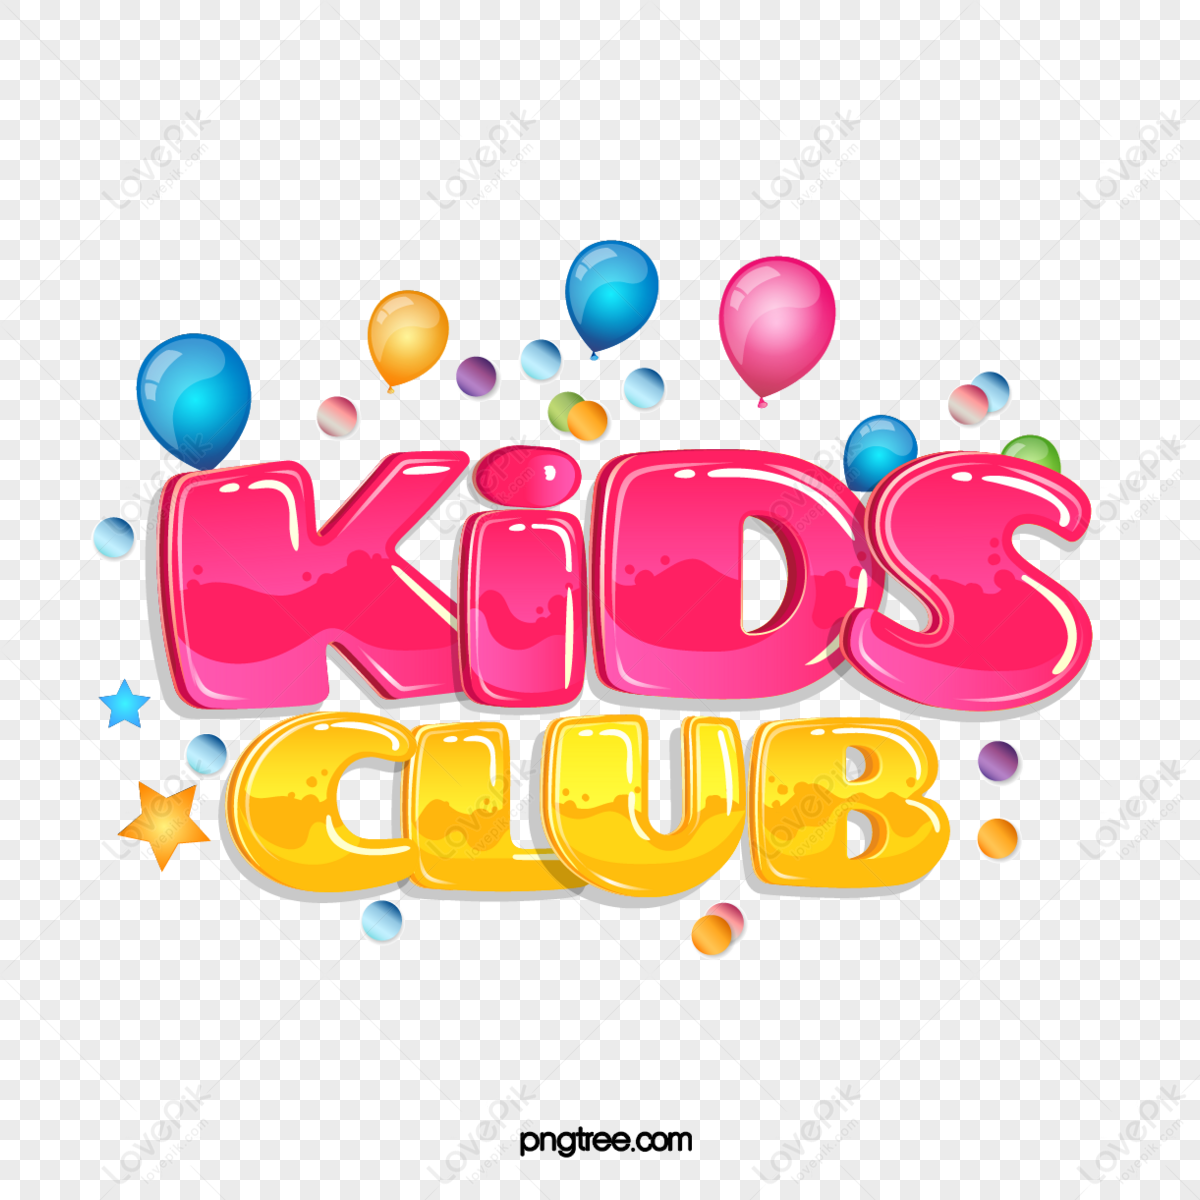 Kids Word Images, HD Pictures For Free Vectors Download - Lovepik.com